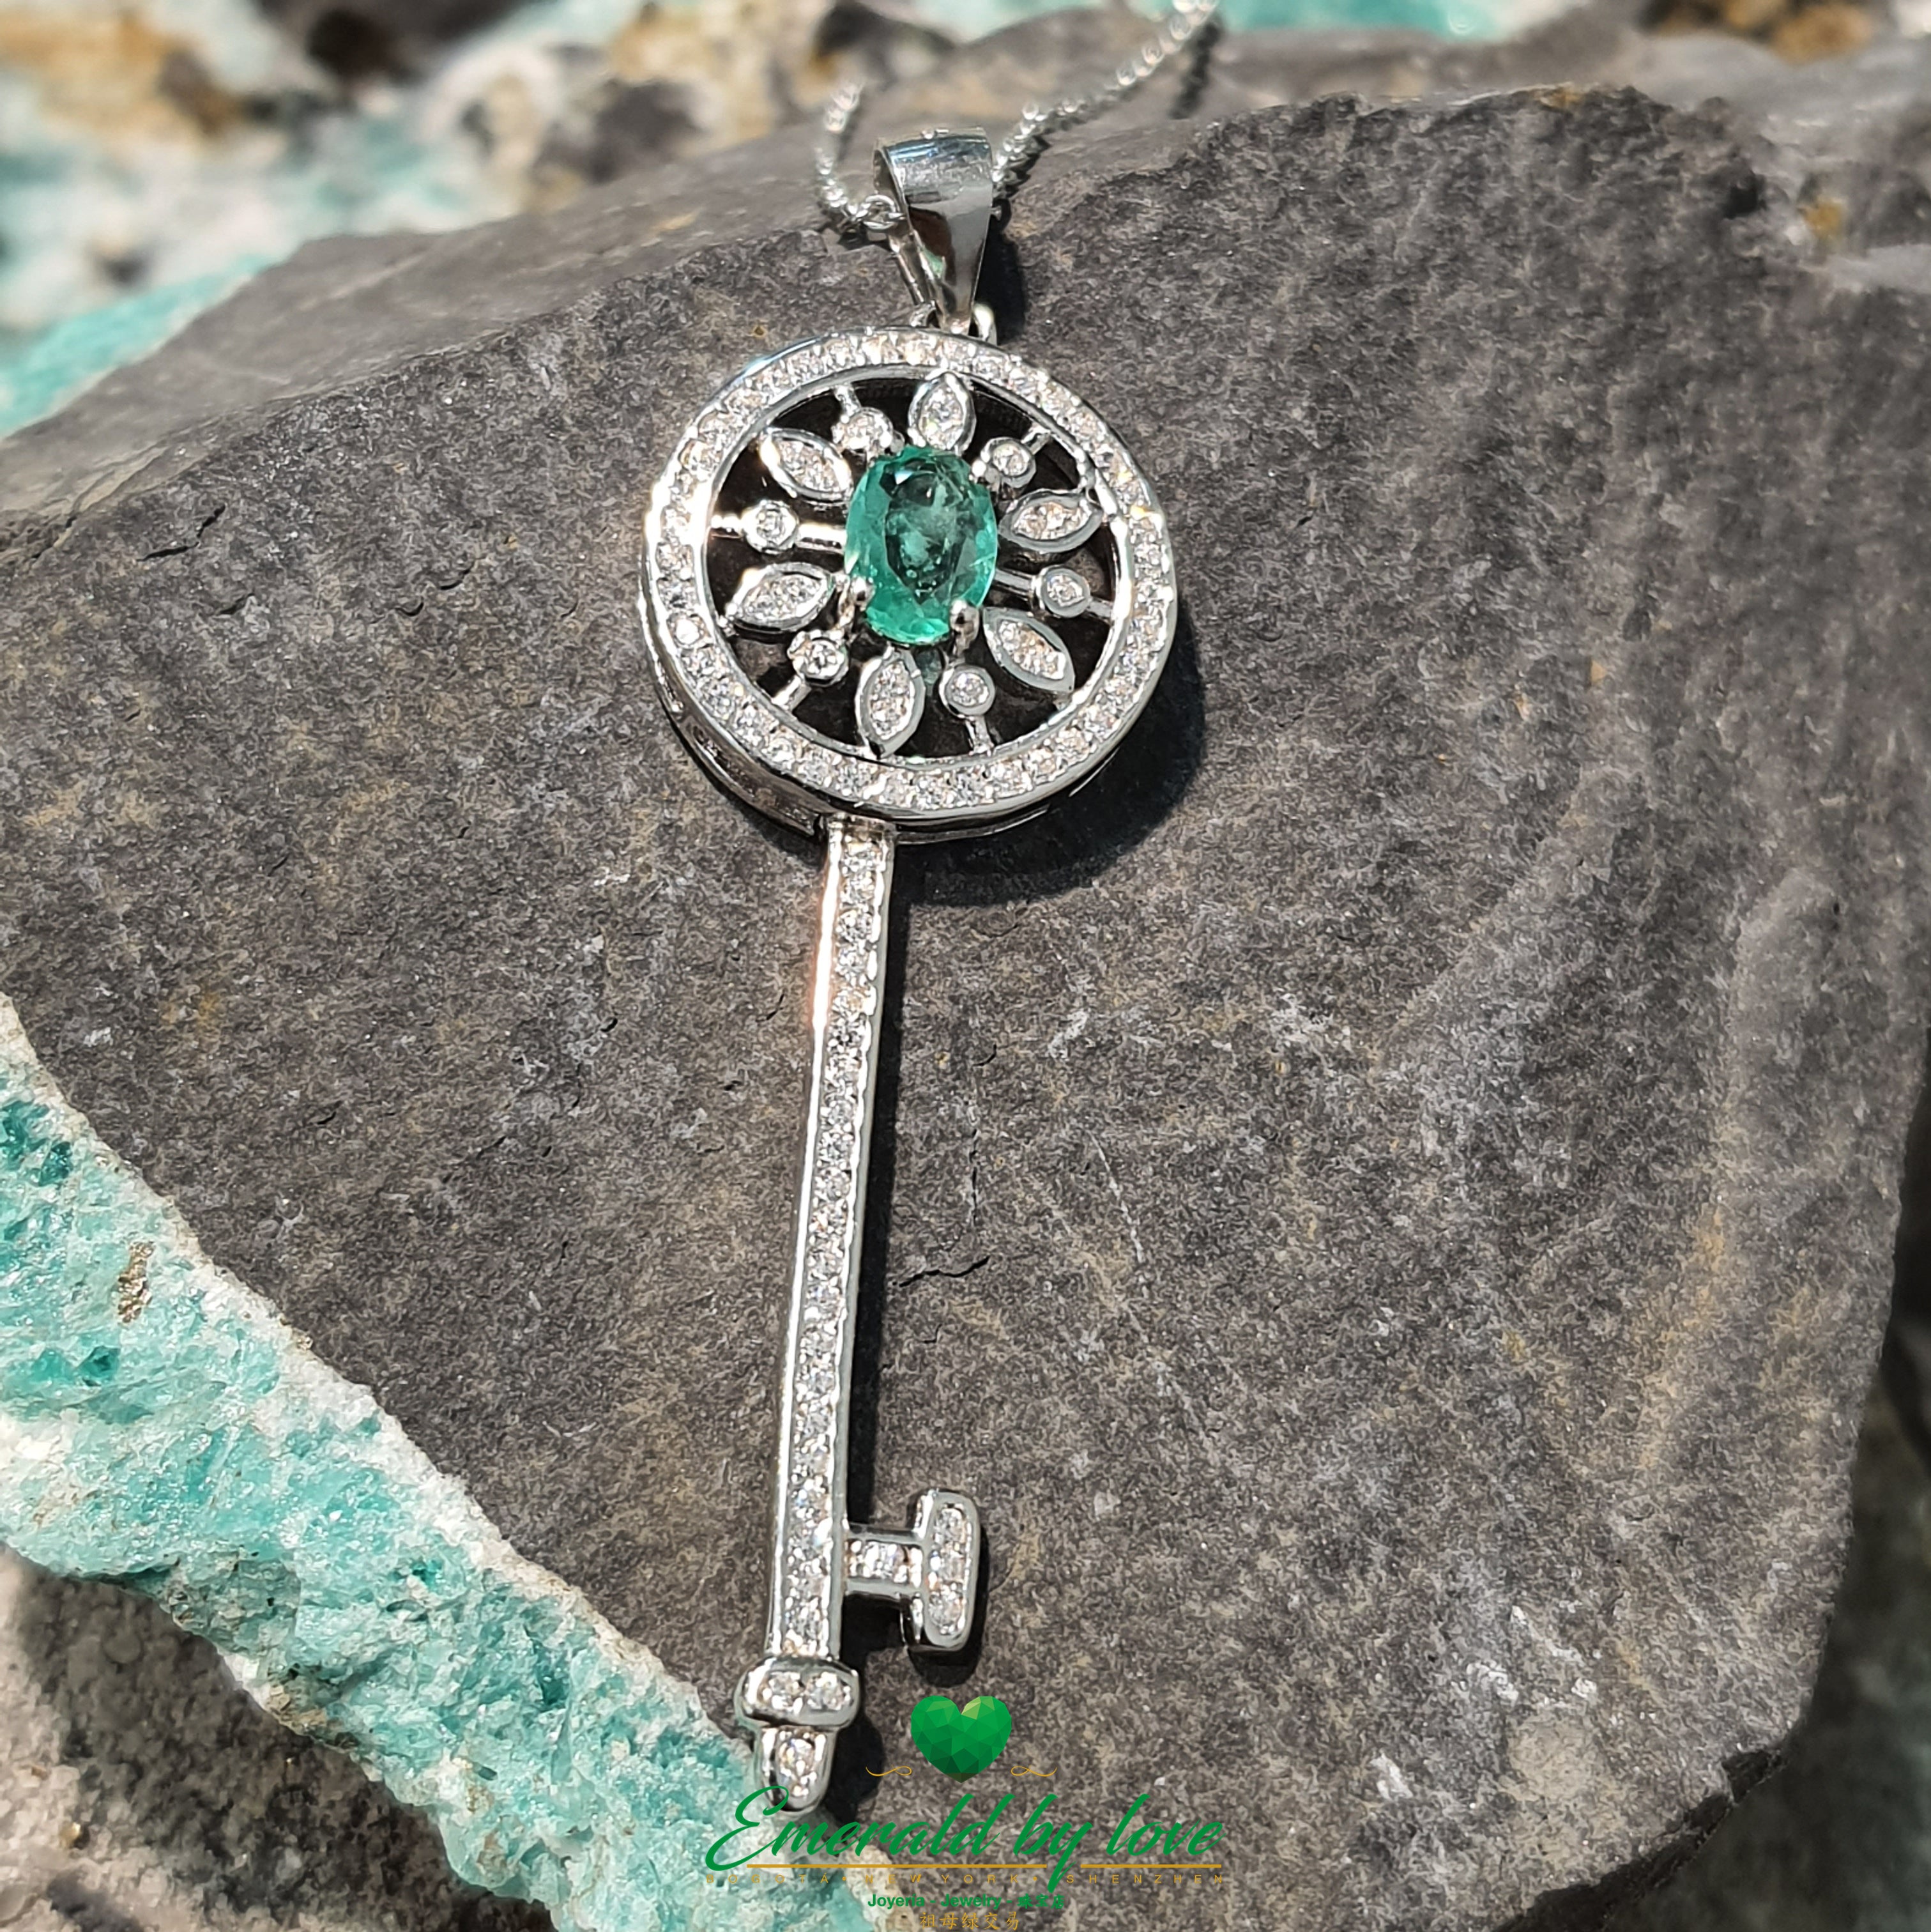 Medium-Sized Key Pendant in Sterling Silver with Oval Central Emerald